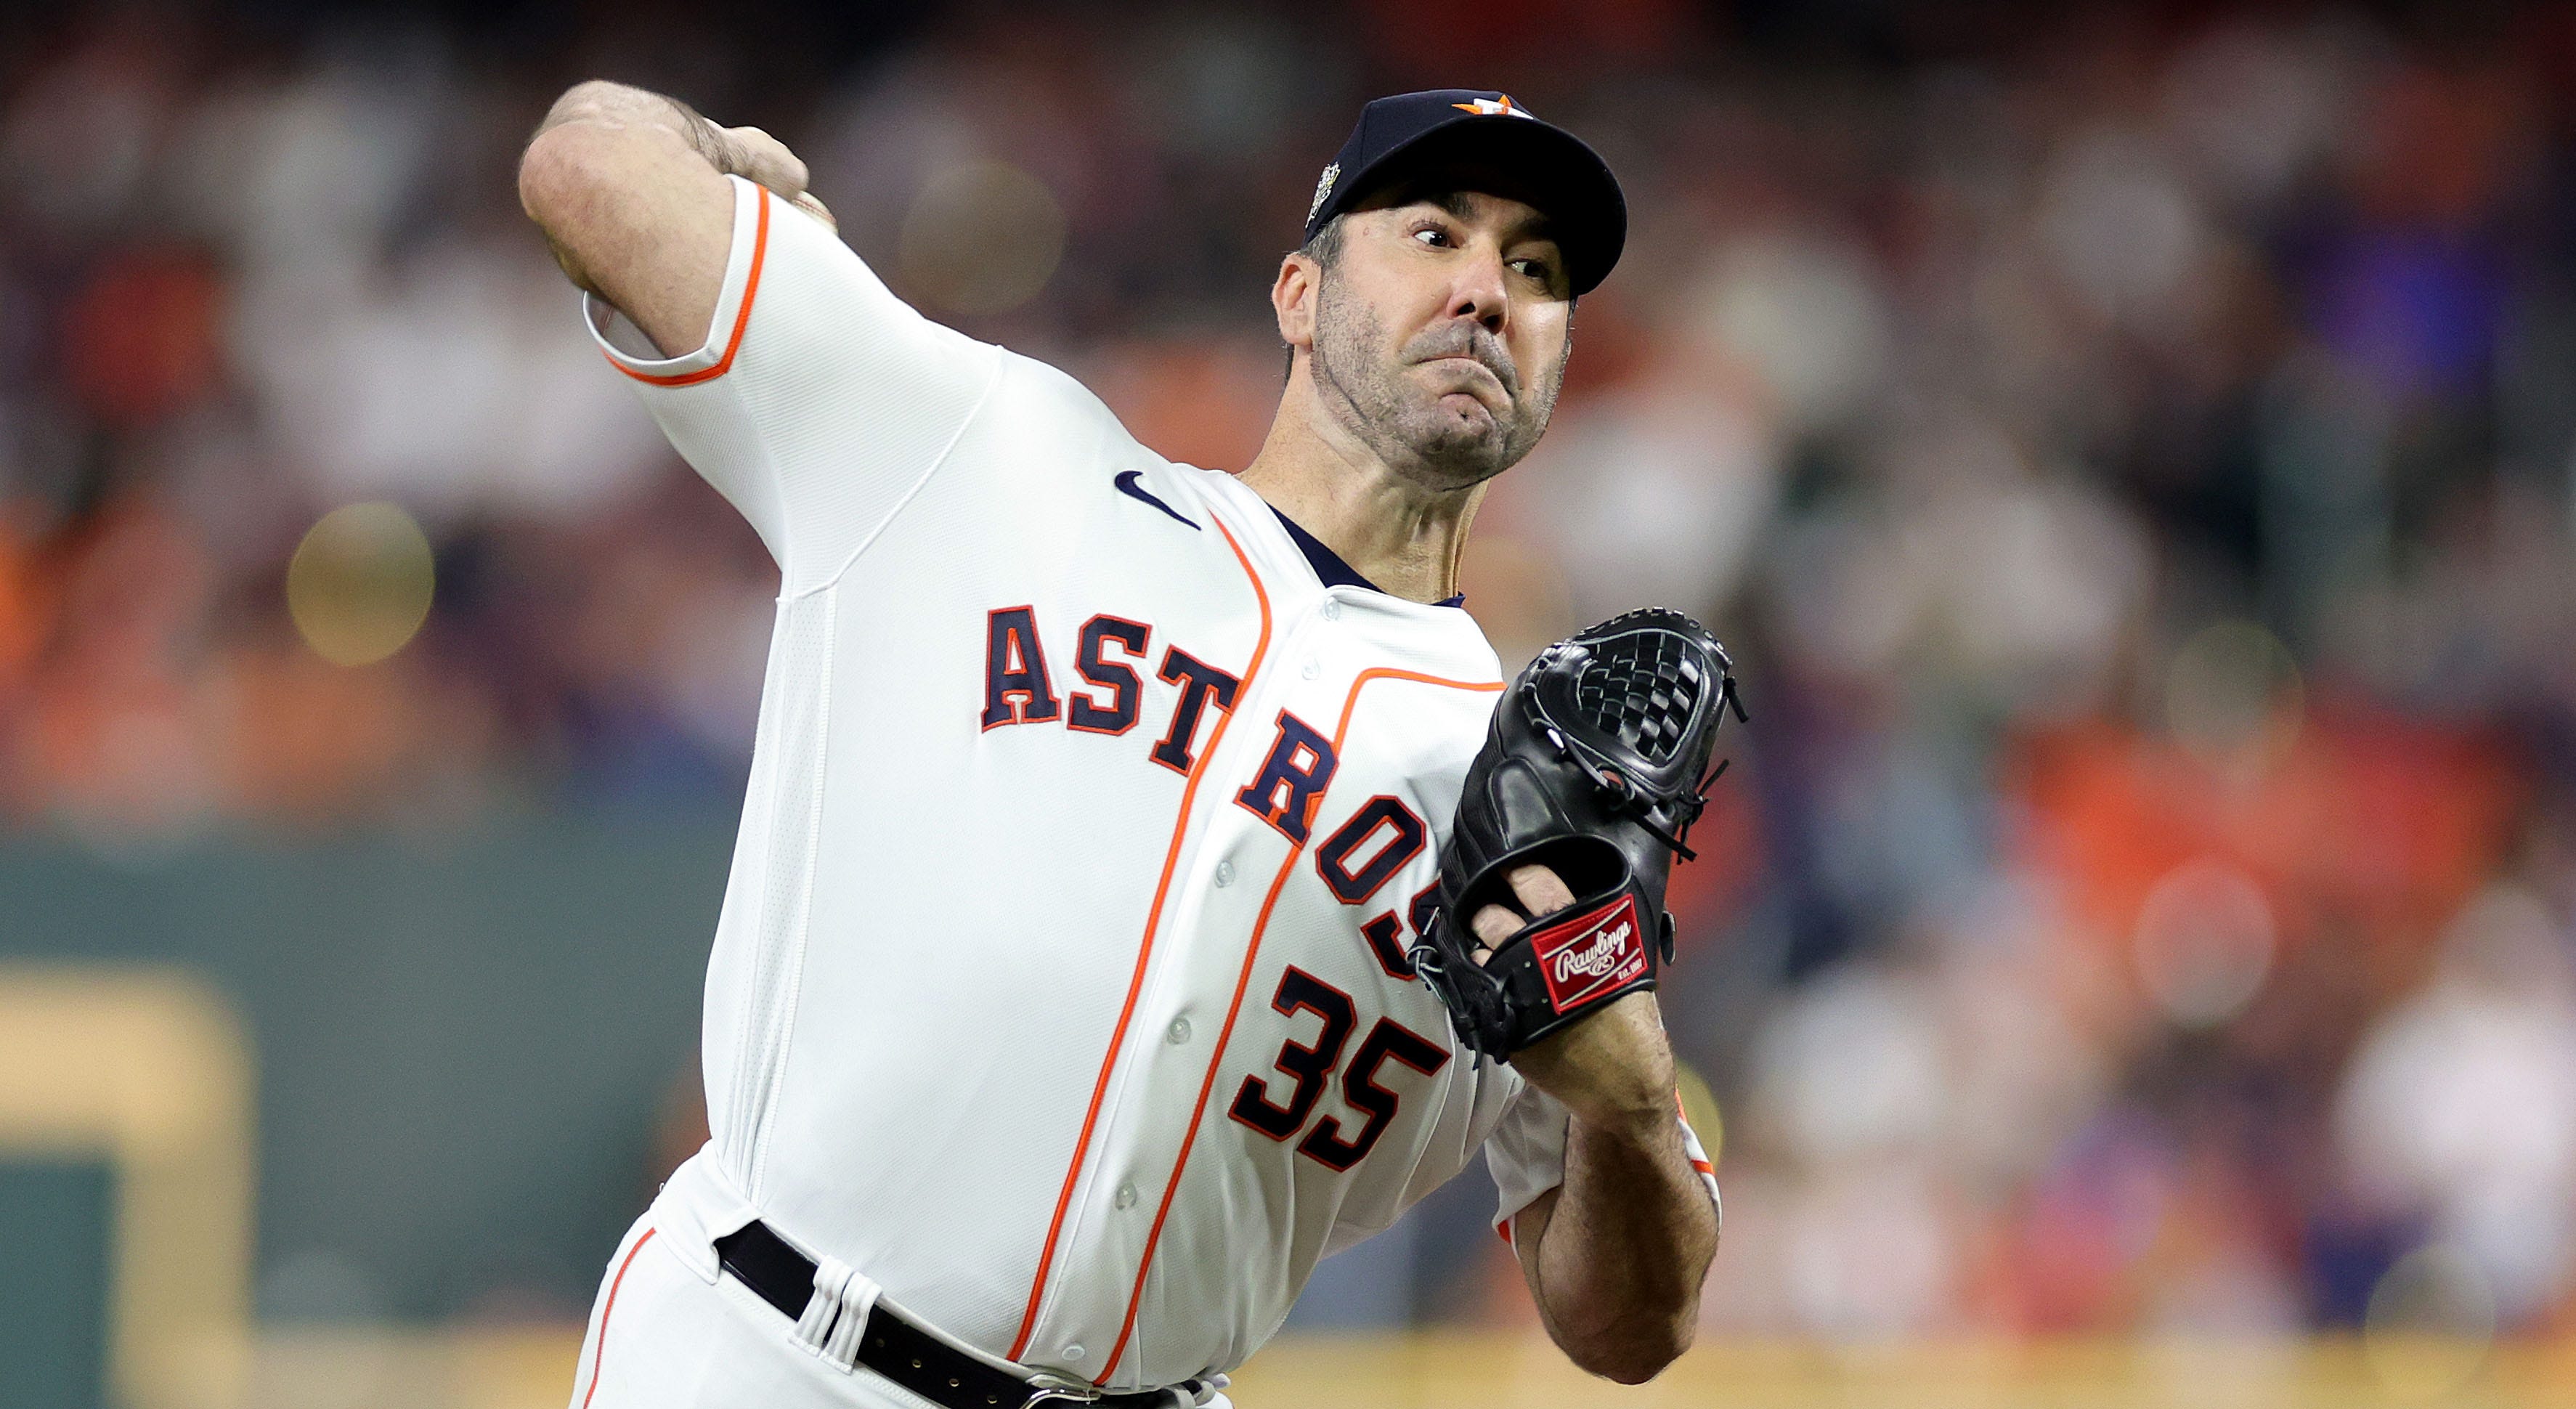 The Mets are trading Justin Verlander to the Astros, AP source says